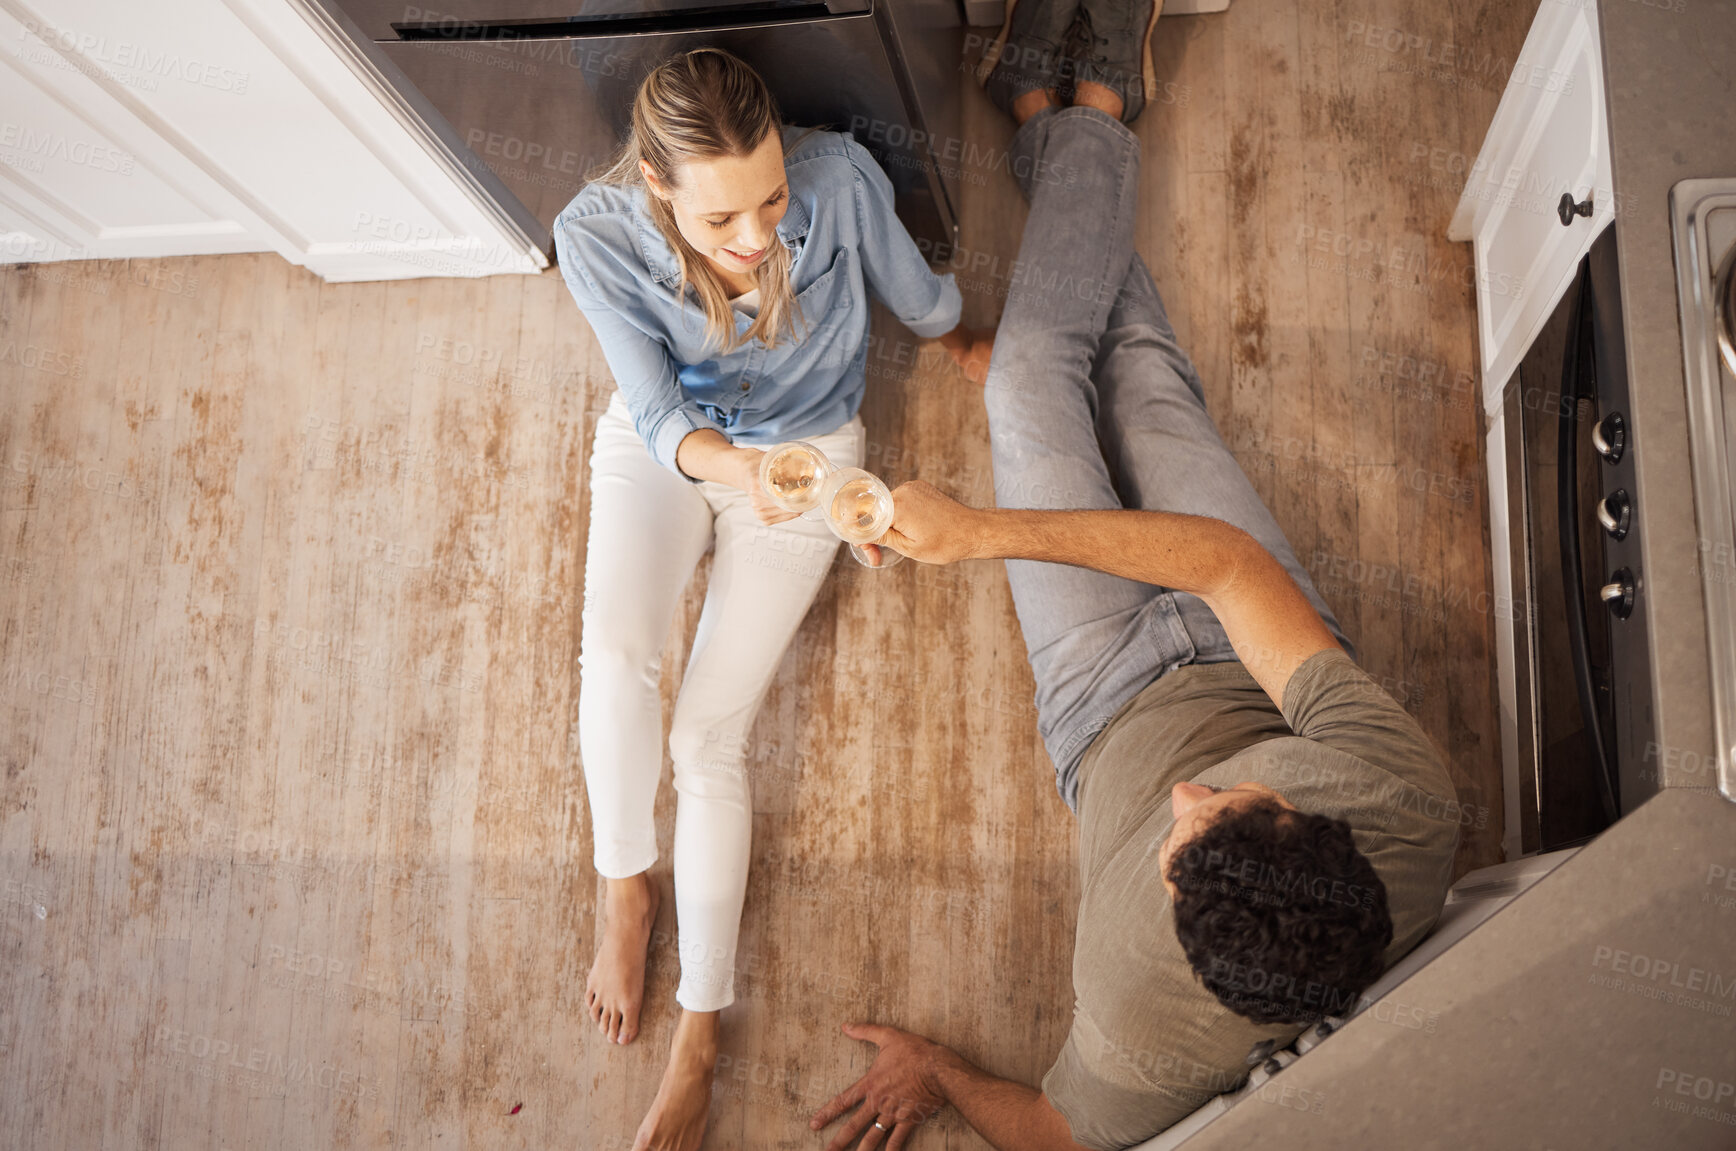 Buy stock photo Champagne, cheers and happy couple on the kitchen floor celebrating their new home renovations. Top view of happiness, sparkling wine and toast to the family house of man and woman relaxing together.